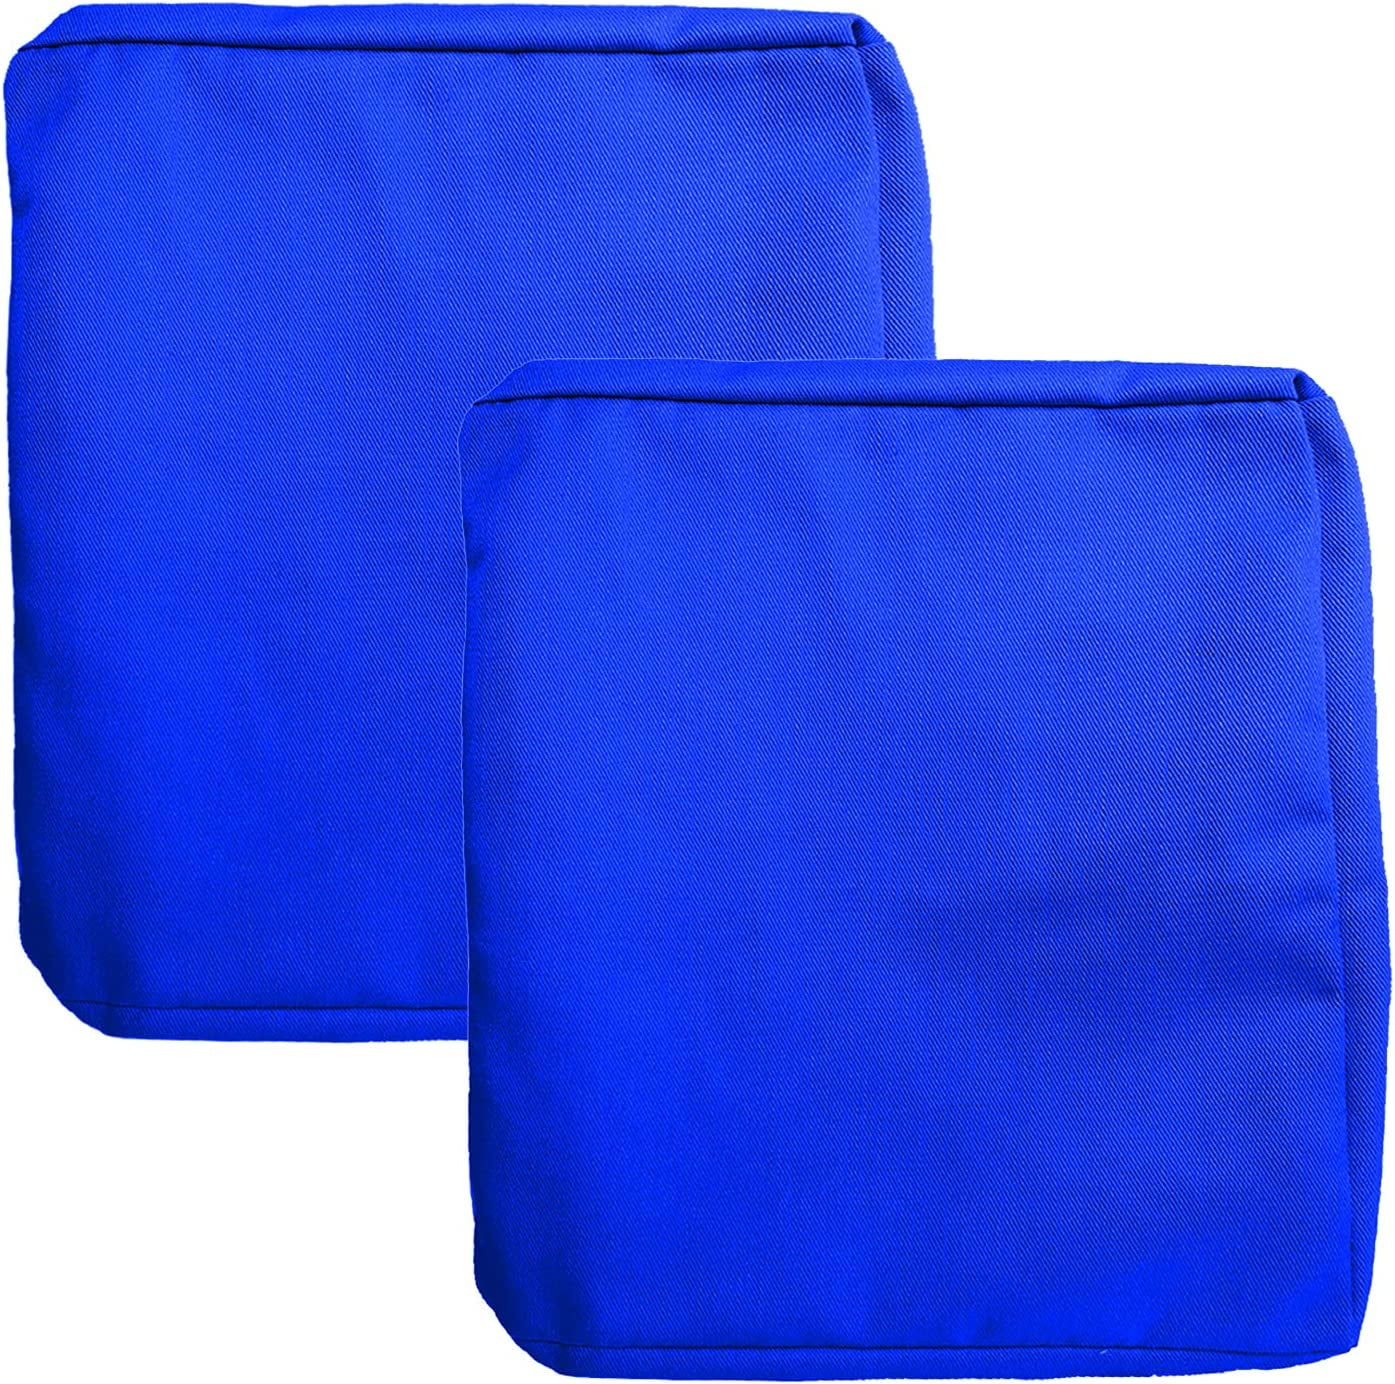 FLYMEI, FLYMEI Outdoor Cushion Cover Replacement, Patio Chair Seat Cushion Covers Only, Water Resistant Patio Cushion Slip Cover (23'' X 23'' X 5'' 2Pack, Royal Blue)